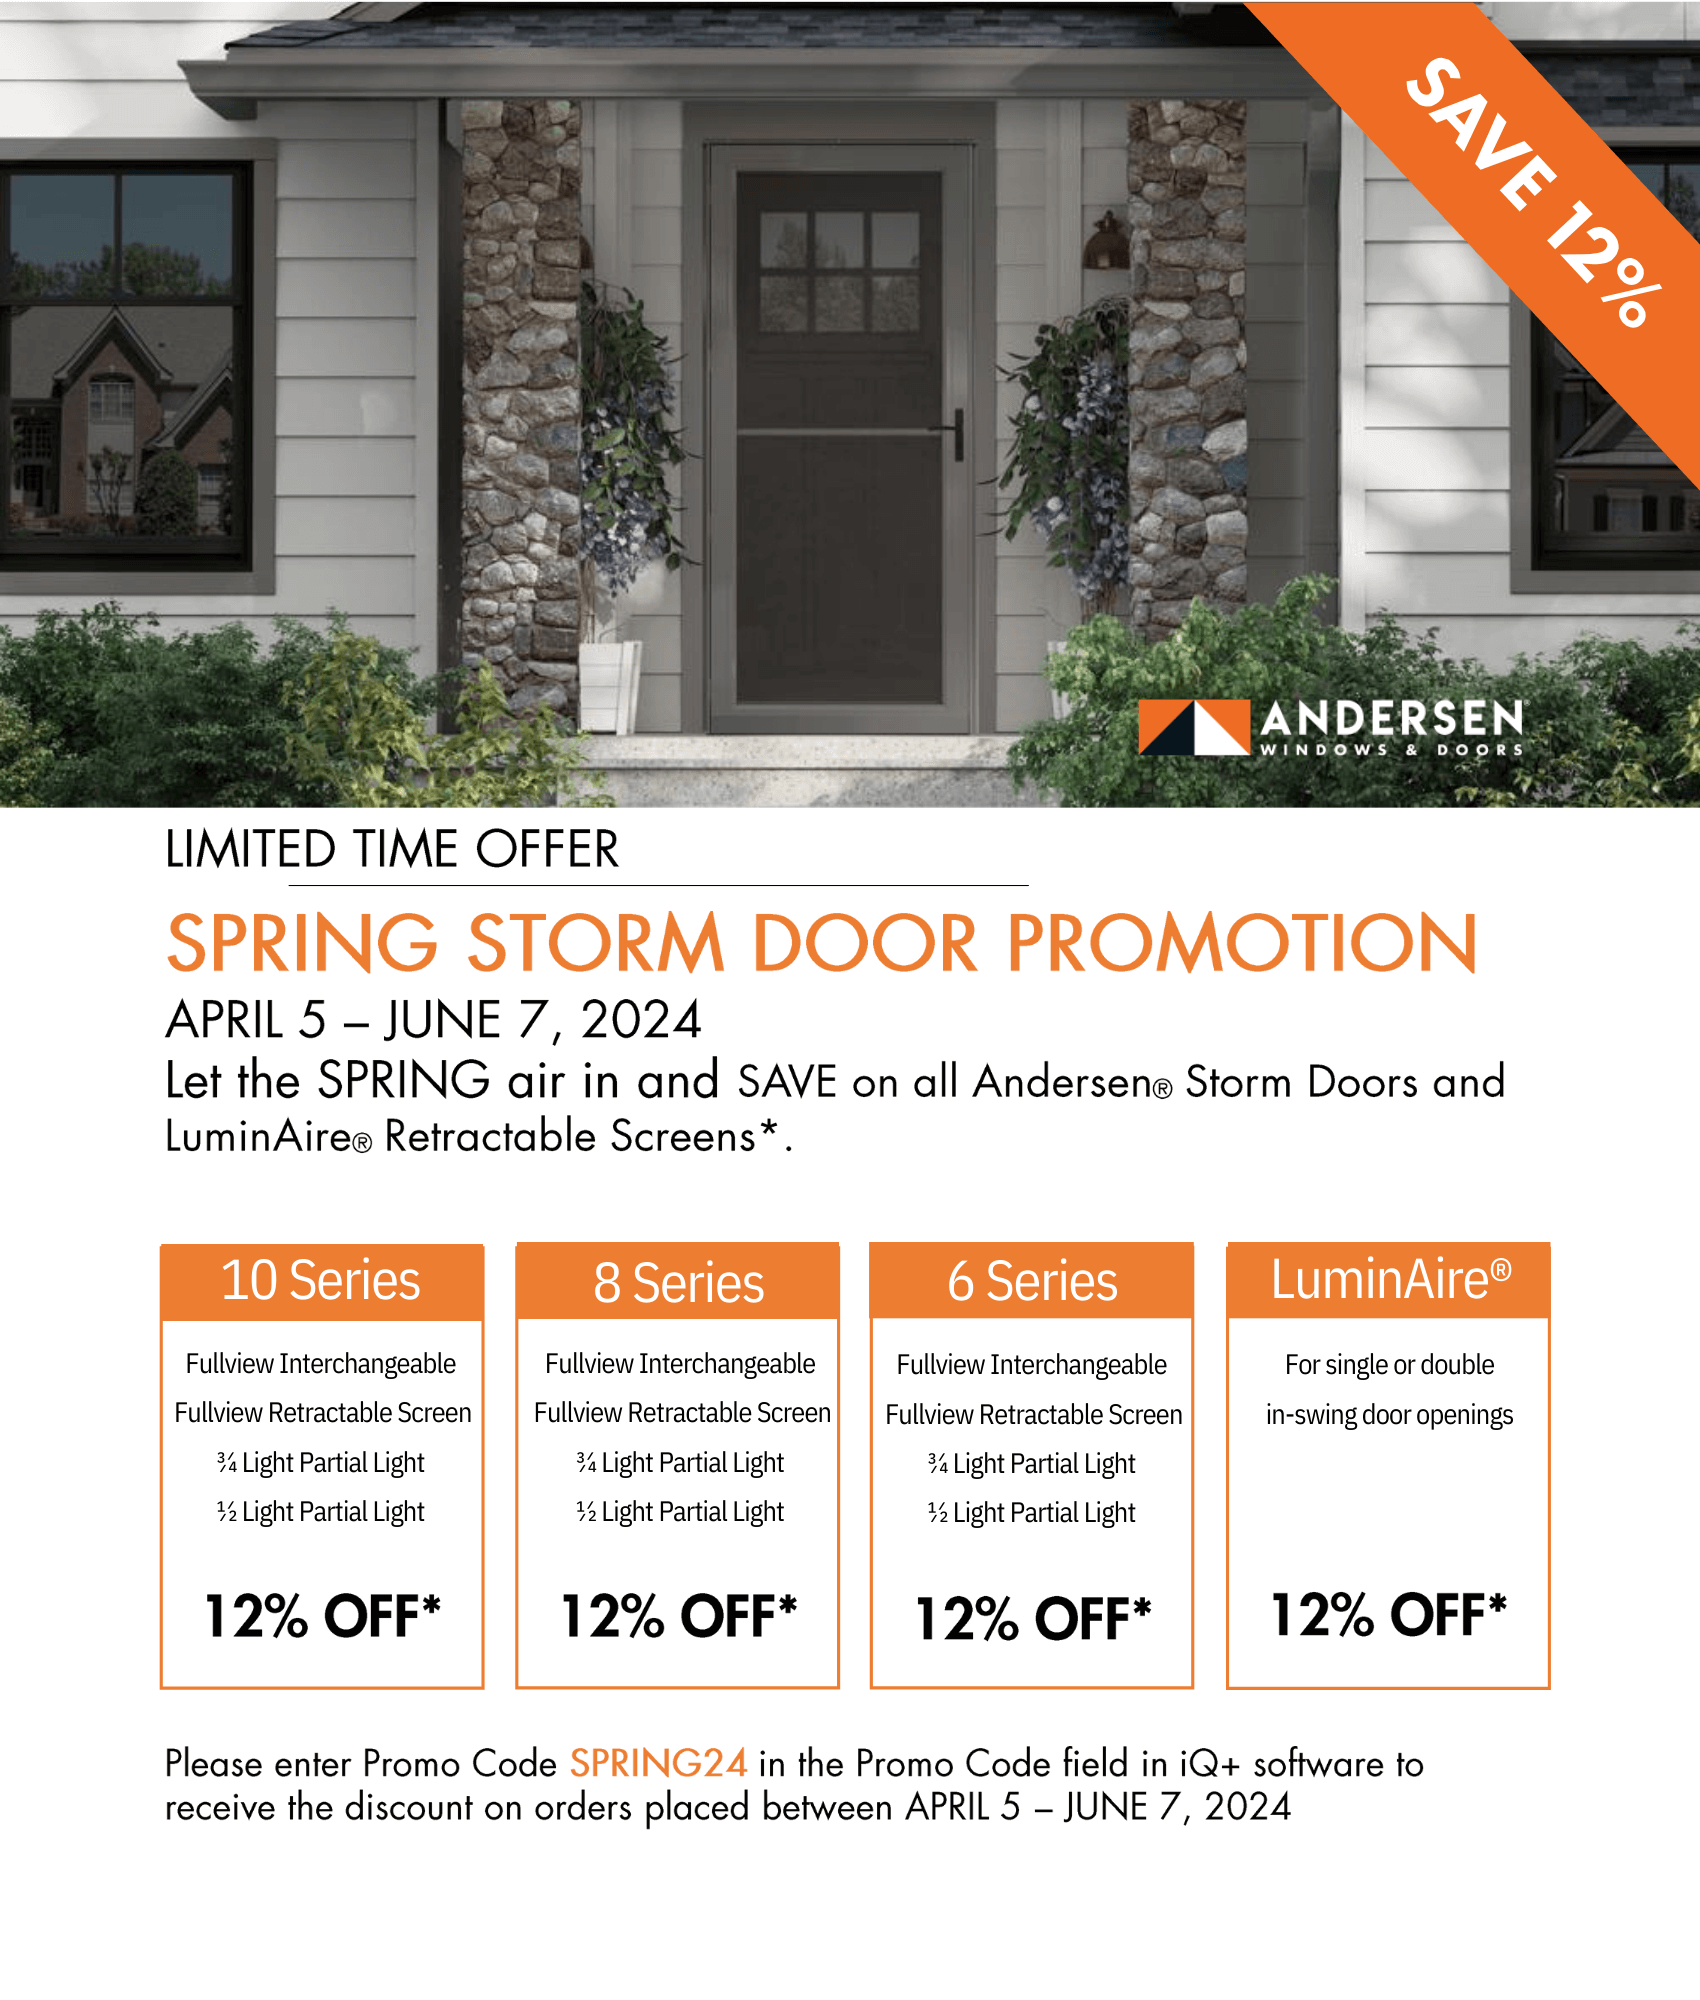 Flyer for Anderson Window Promotion